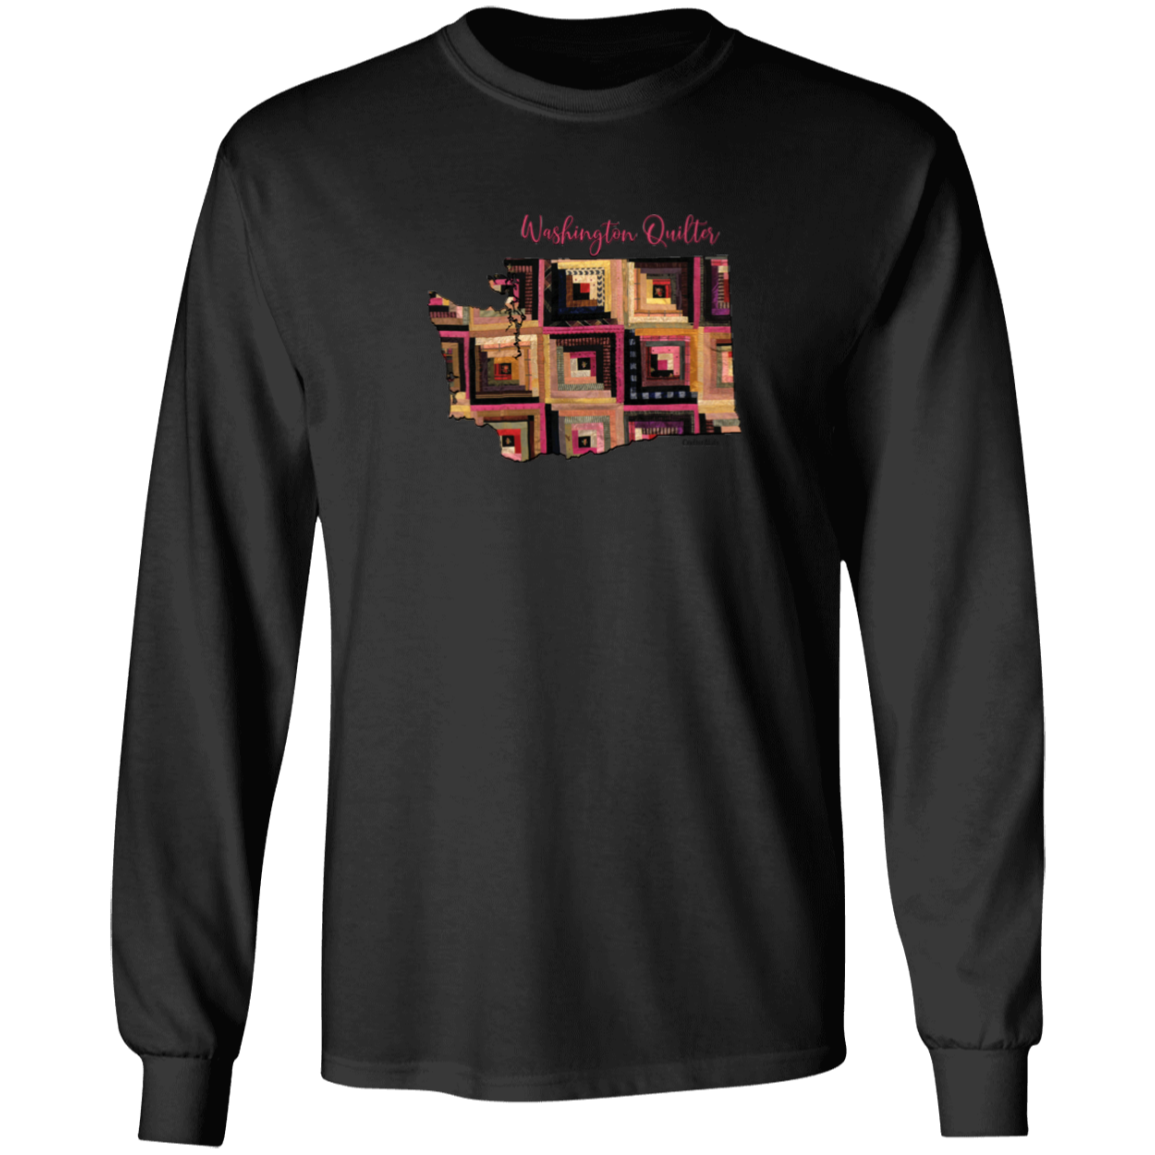 Washington Quilter Long Sleeve T-Shirt, Gift for Quilting Friends and Family